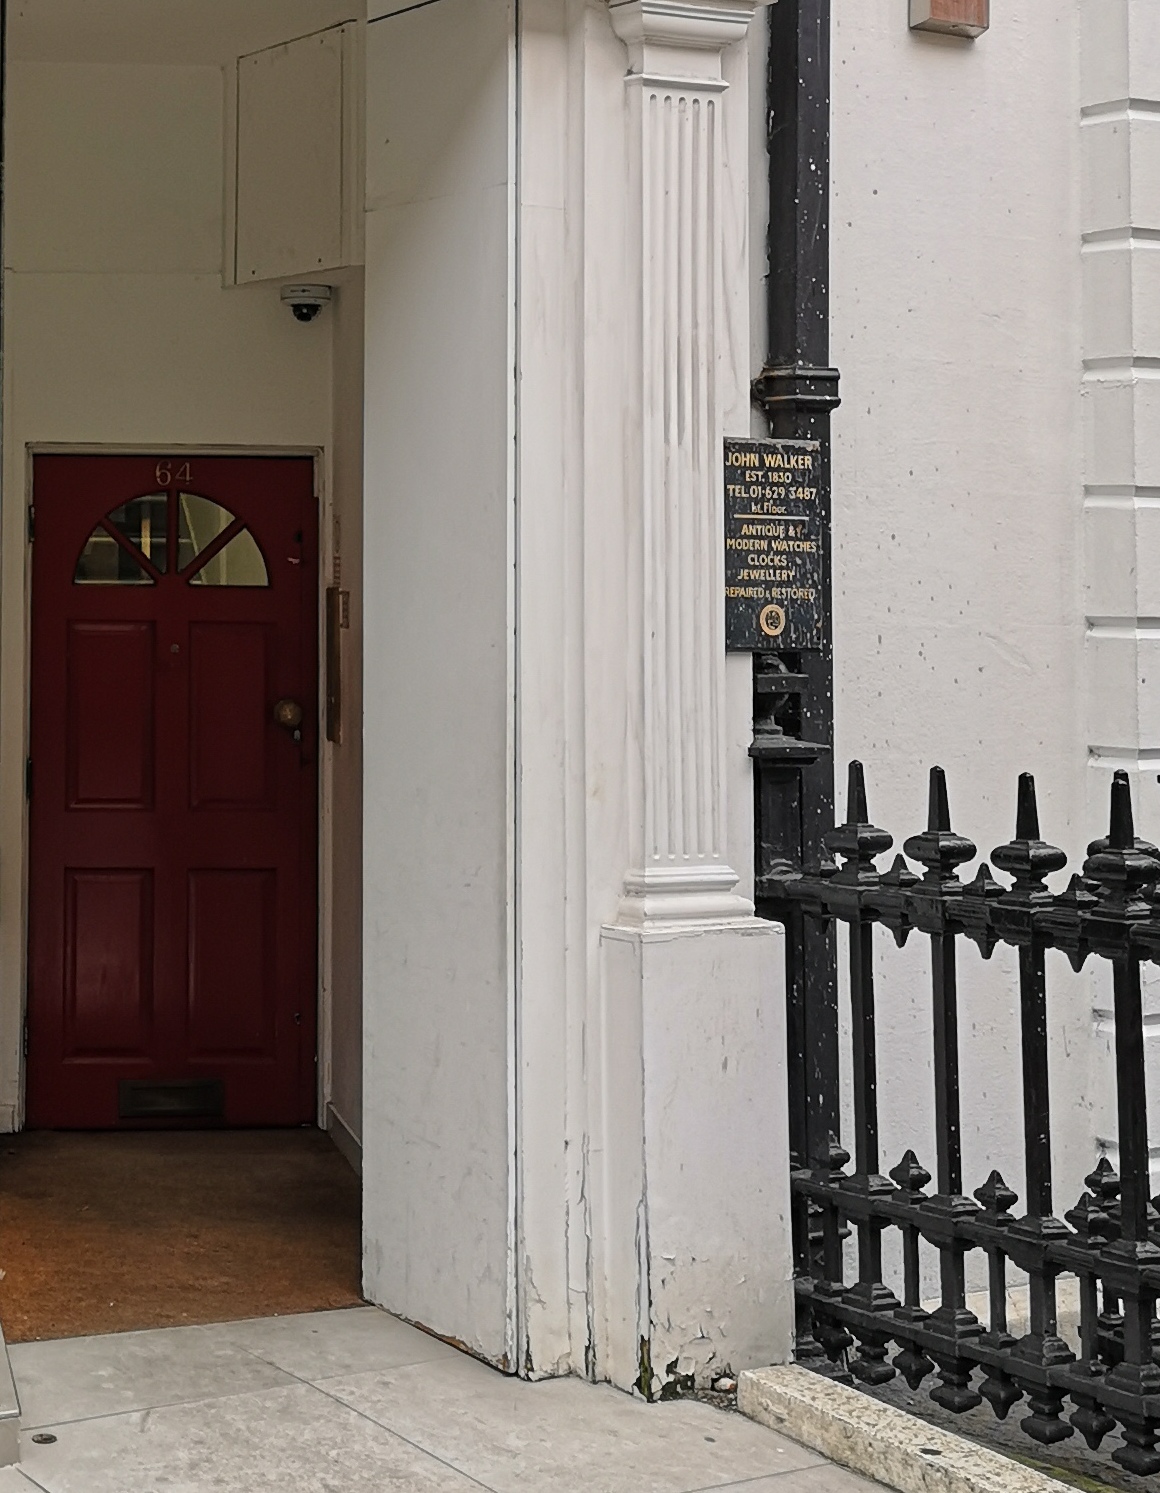 A QUICK GLANCE AT THE OLD RYEMUSE SOUND STUDIOS IN MAYFAIR